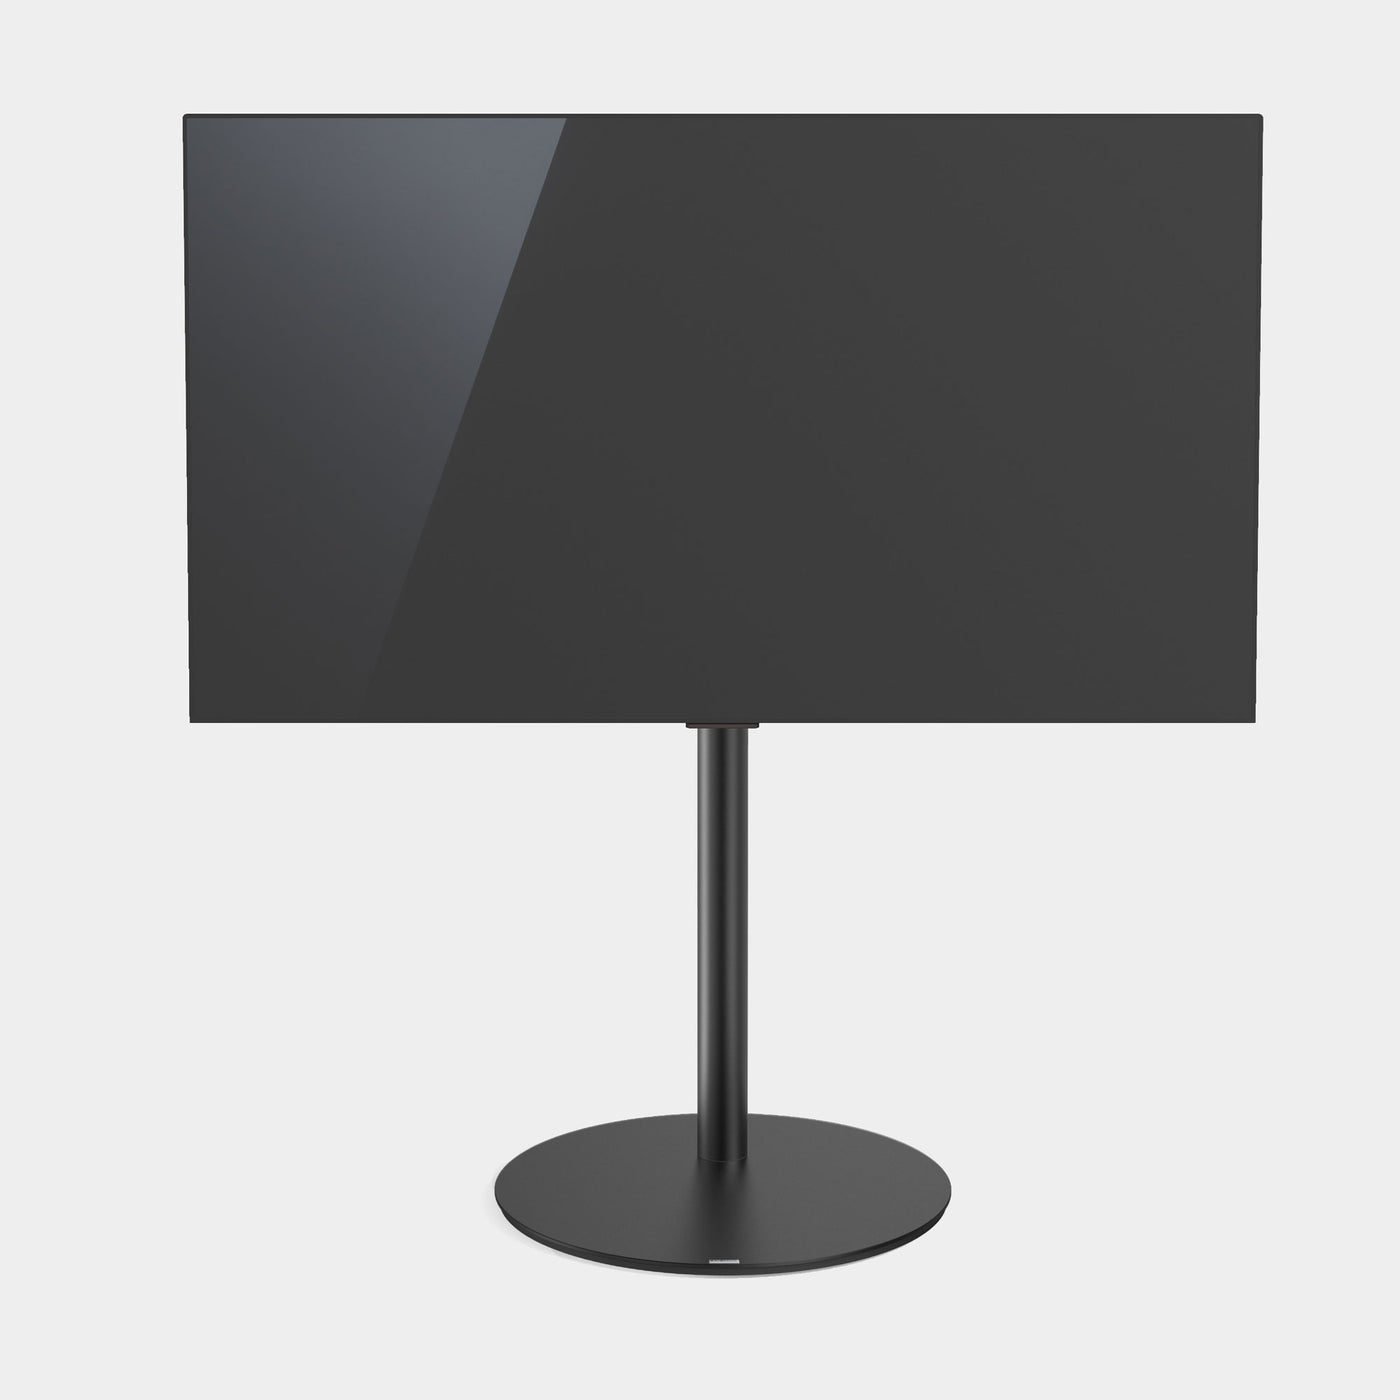 Spectral Circle VX1000 Rotating TV Stand | Front View | Satin Black | Holburn Online